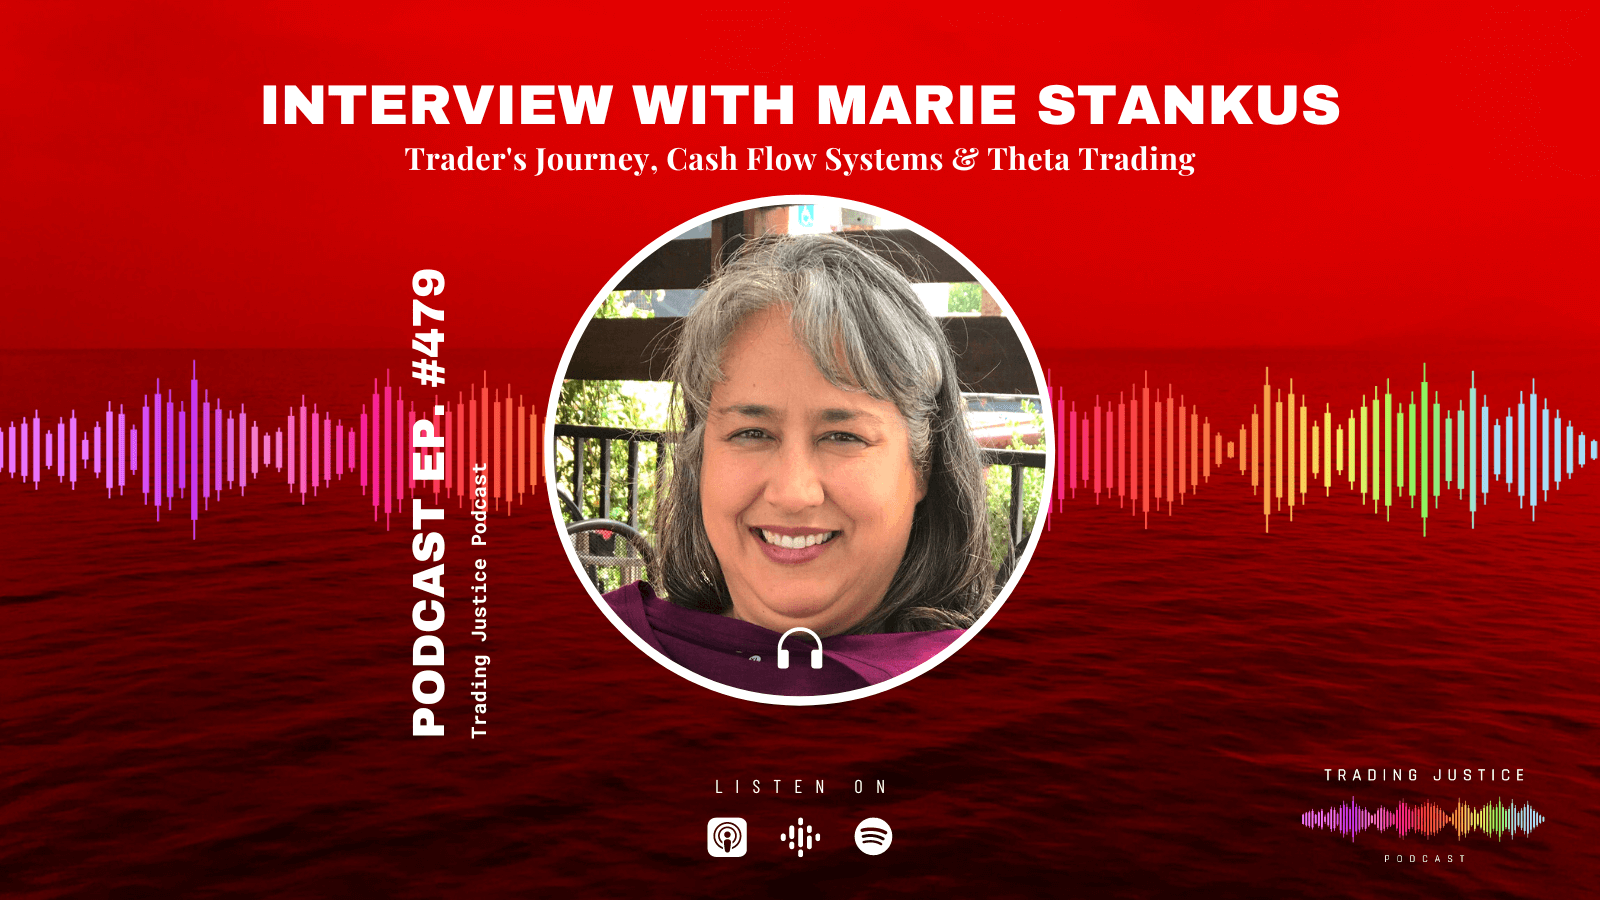 Trading Justice 479: Interview with Marie Stankus